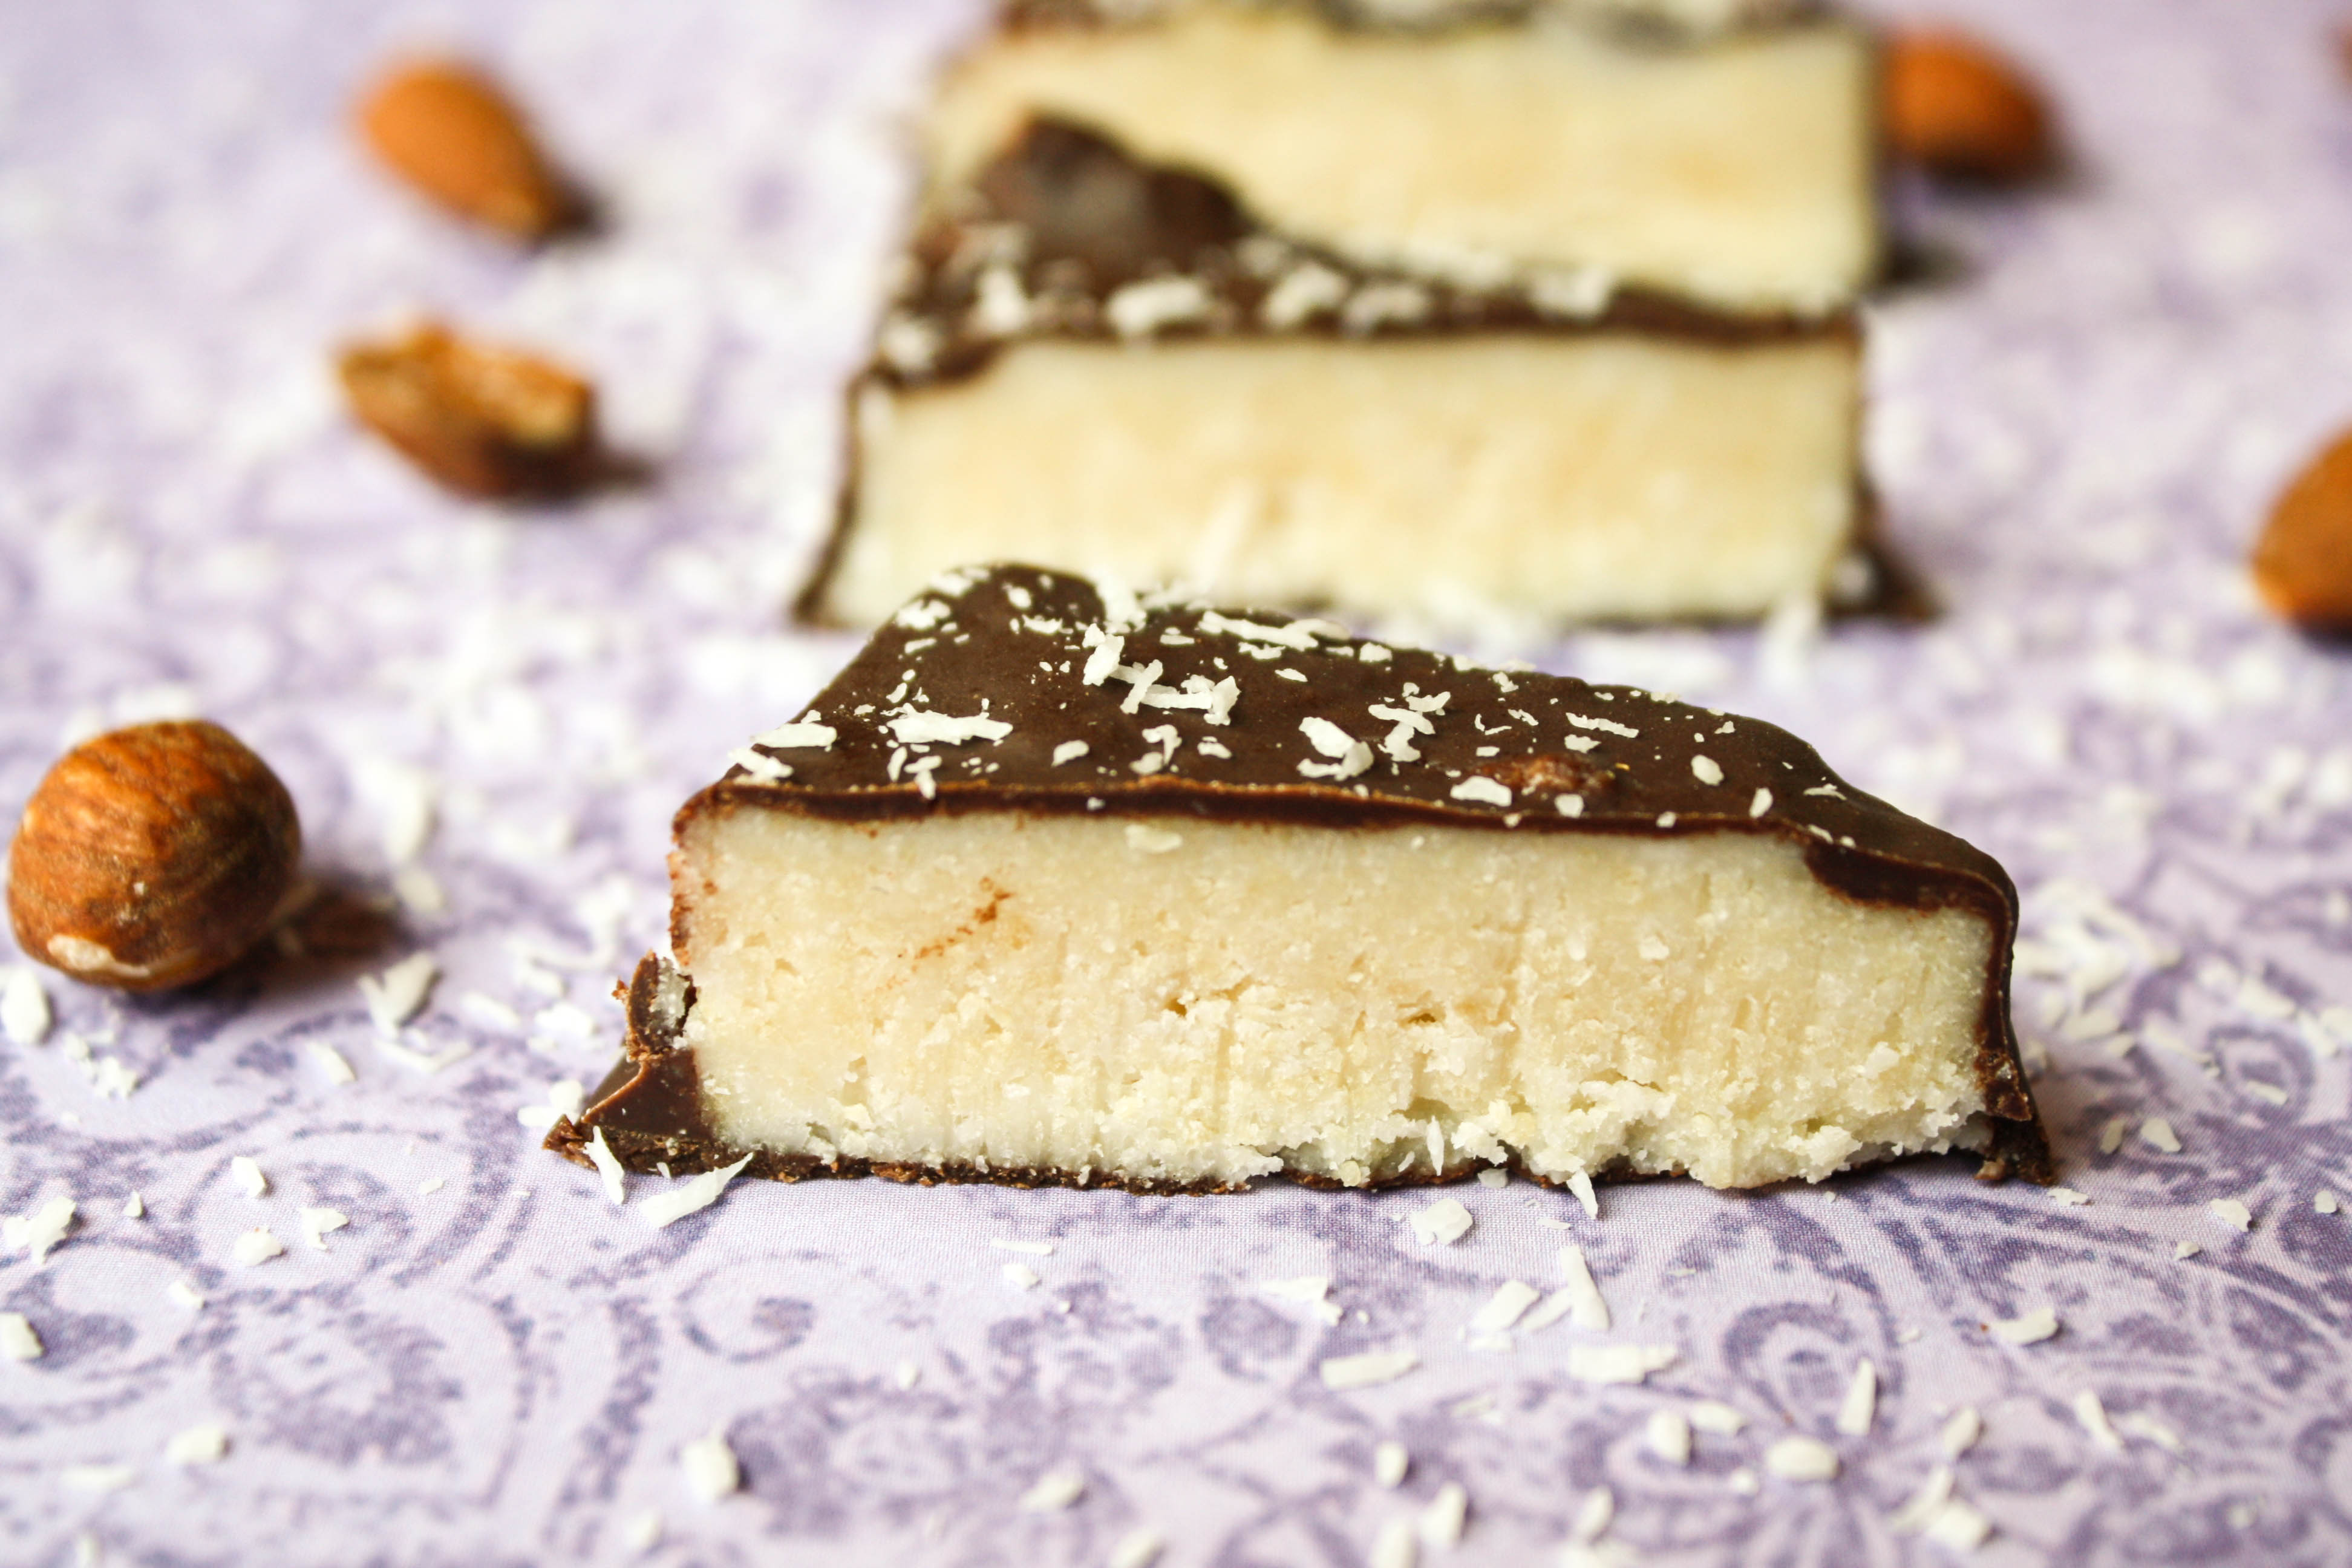 chocolate coated triangle cut almond coconut bars on a purple floral fabric surrounded by whole almonds